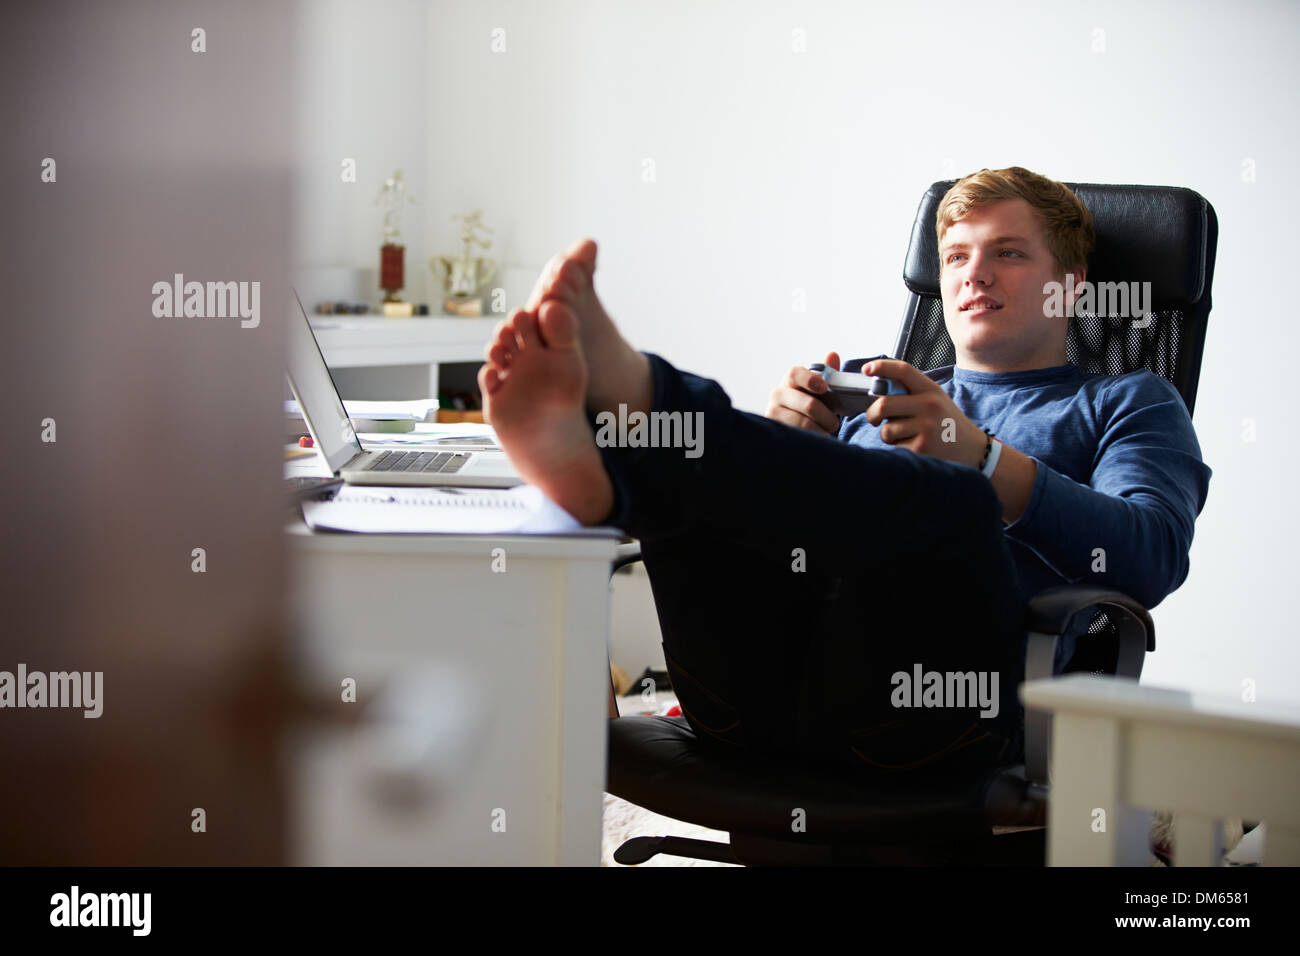 Teenage Boy Playing Video Game In Bedroom Stock Photo